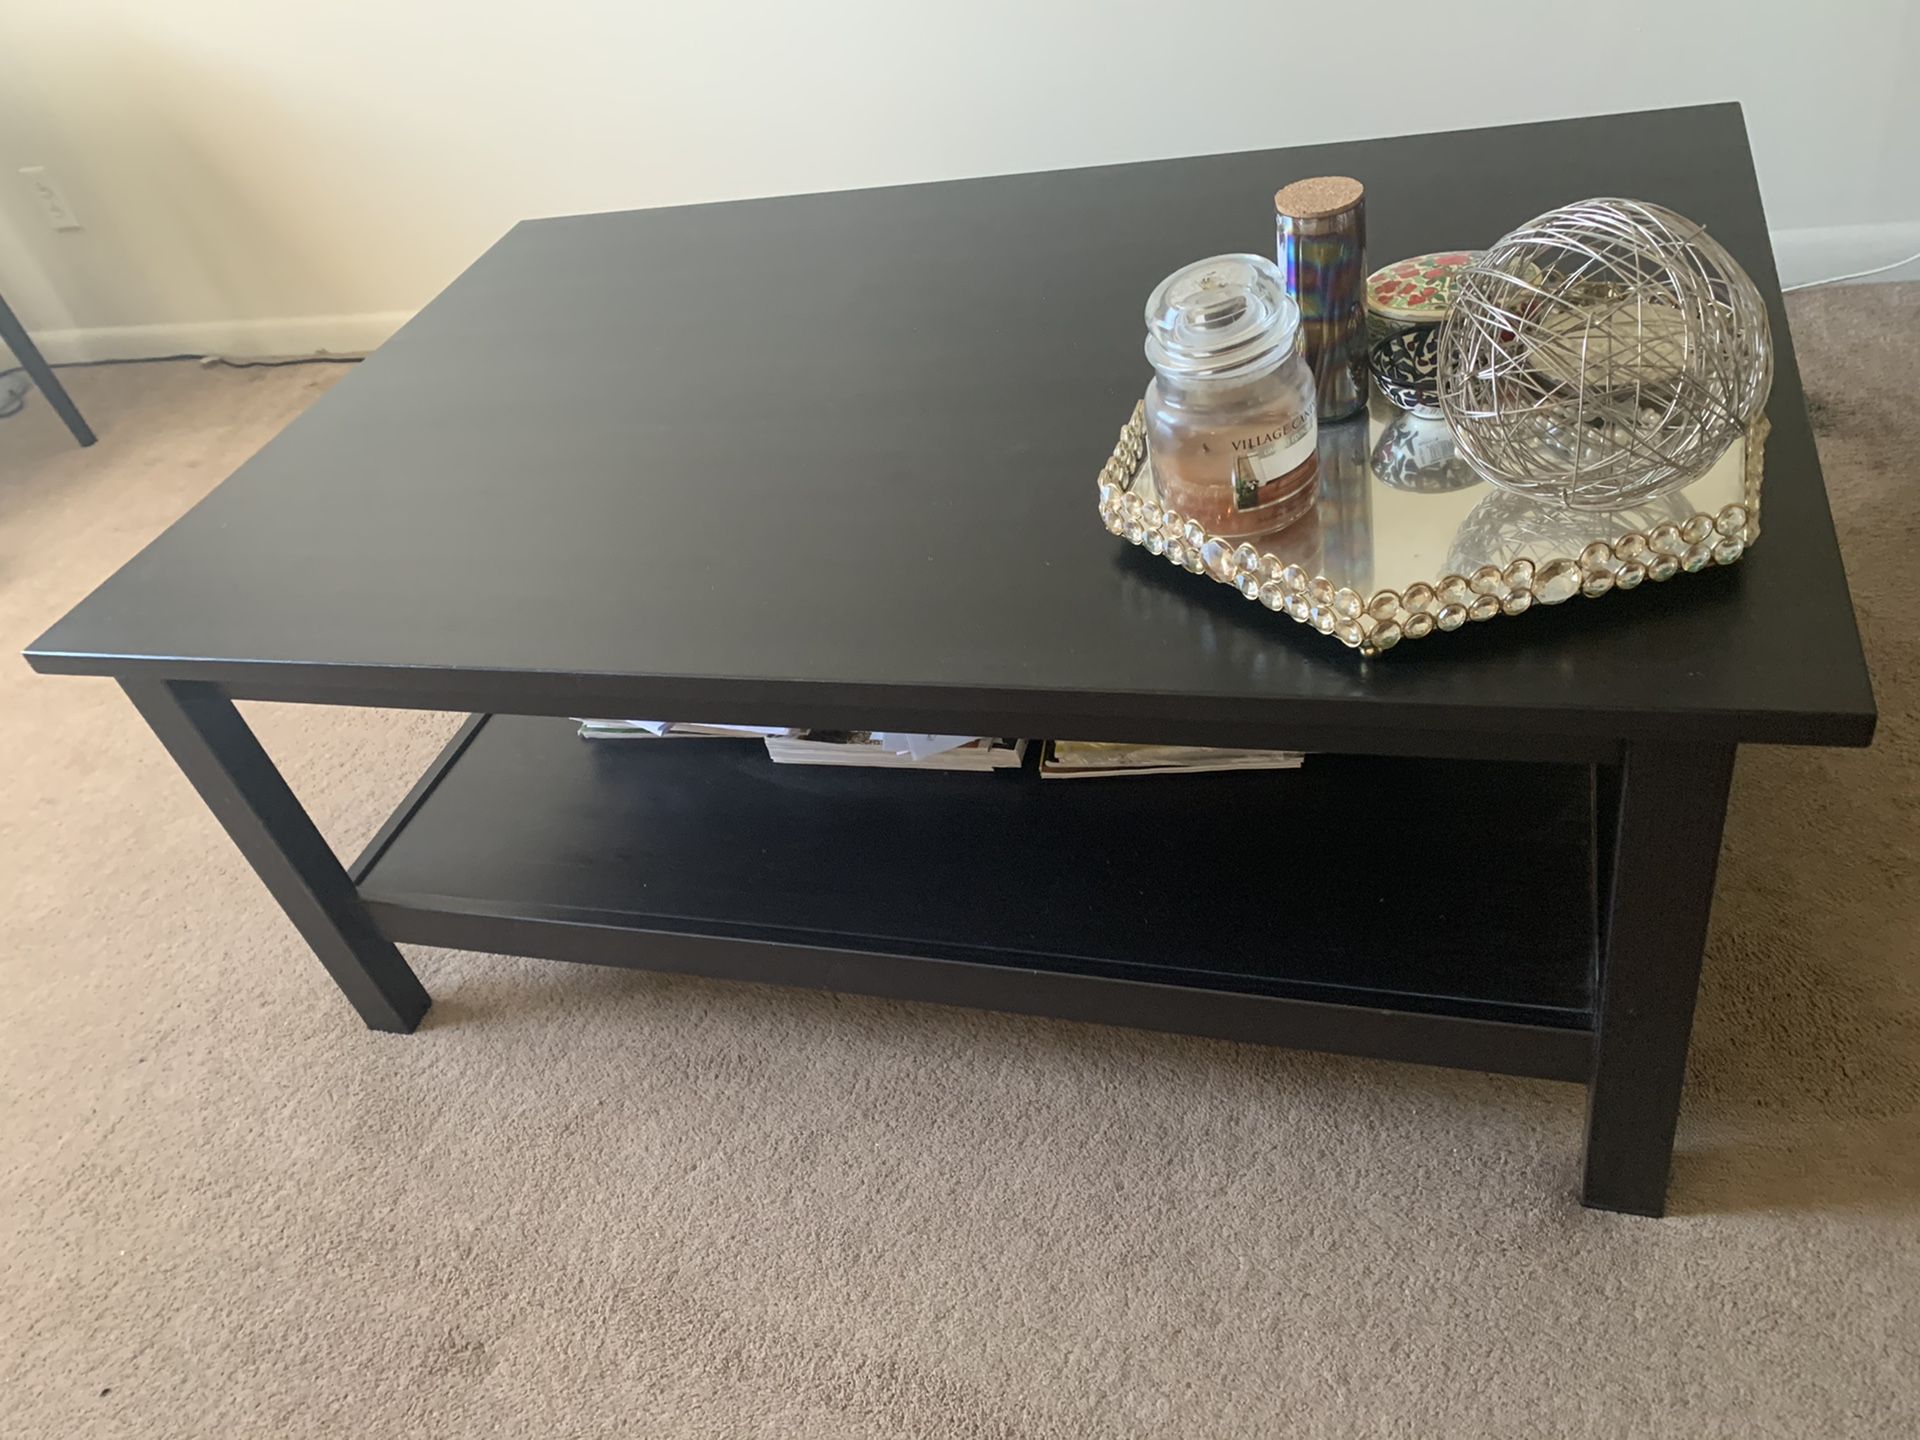 Coffee table from Ikea